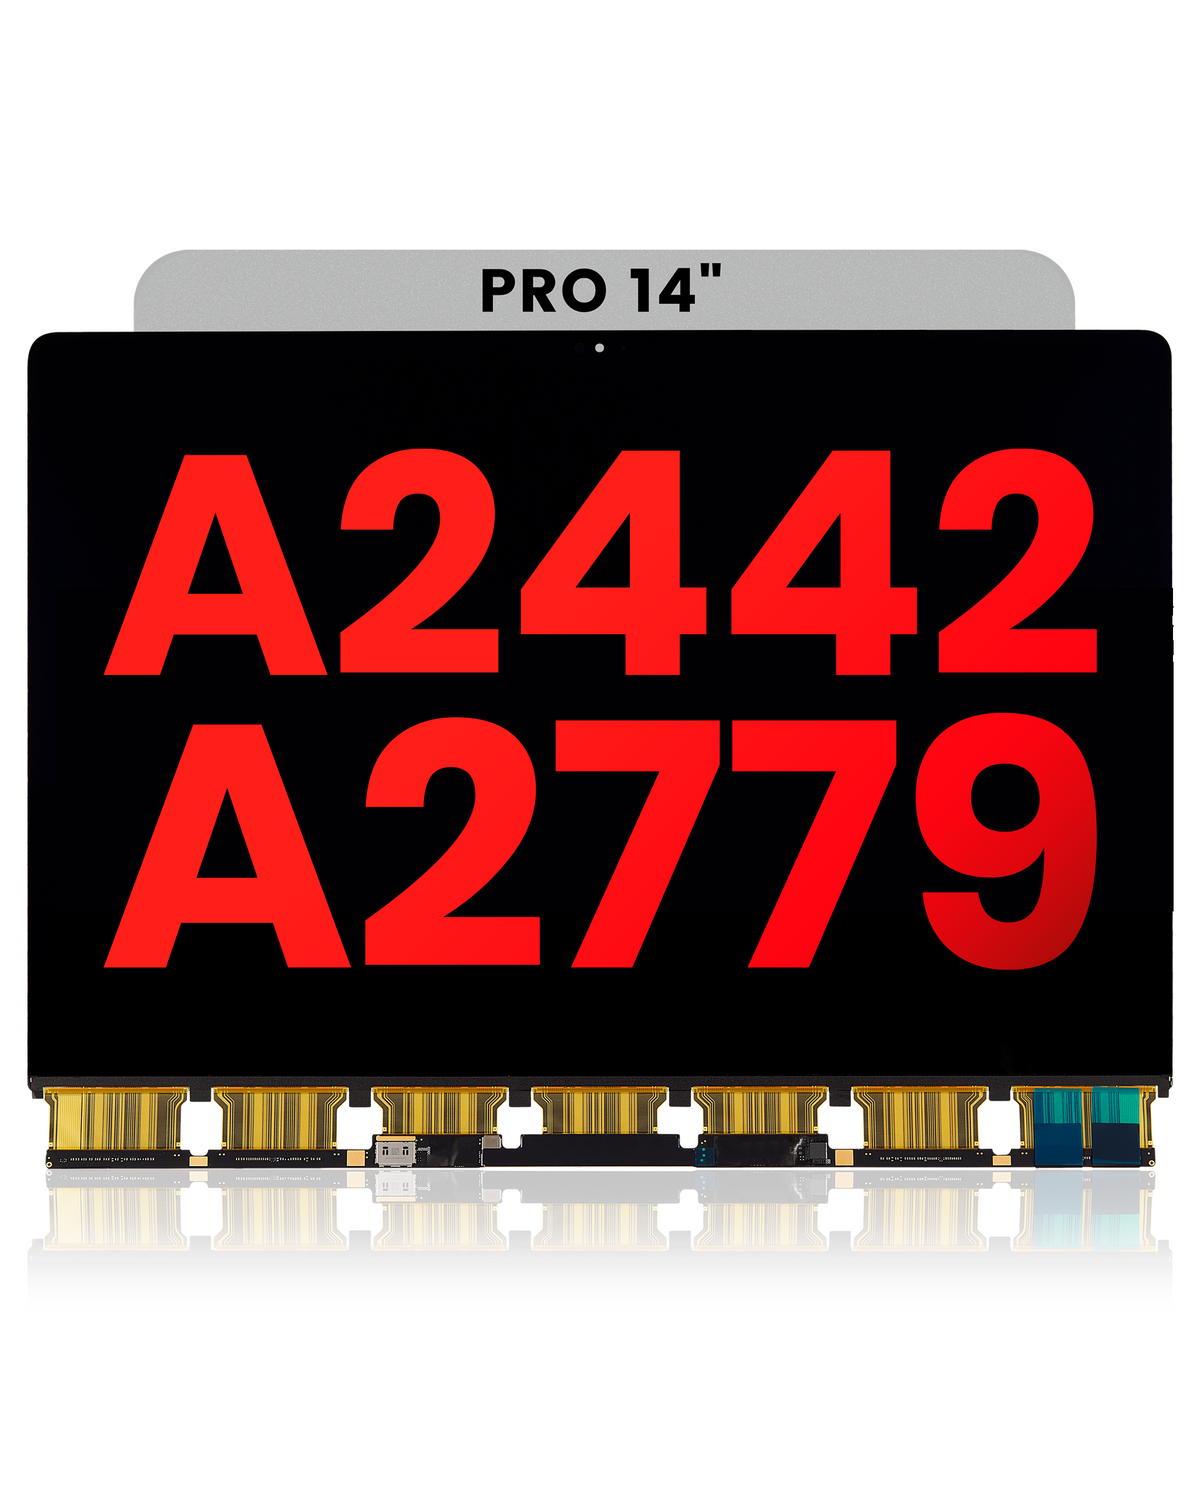 LCD Panel Only Compatible For MacBook Pro 14" (A2442) / (A2779) (Compatible With All Years) (Aftermarket Plus)